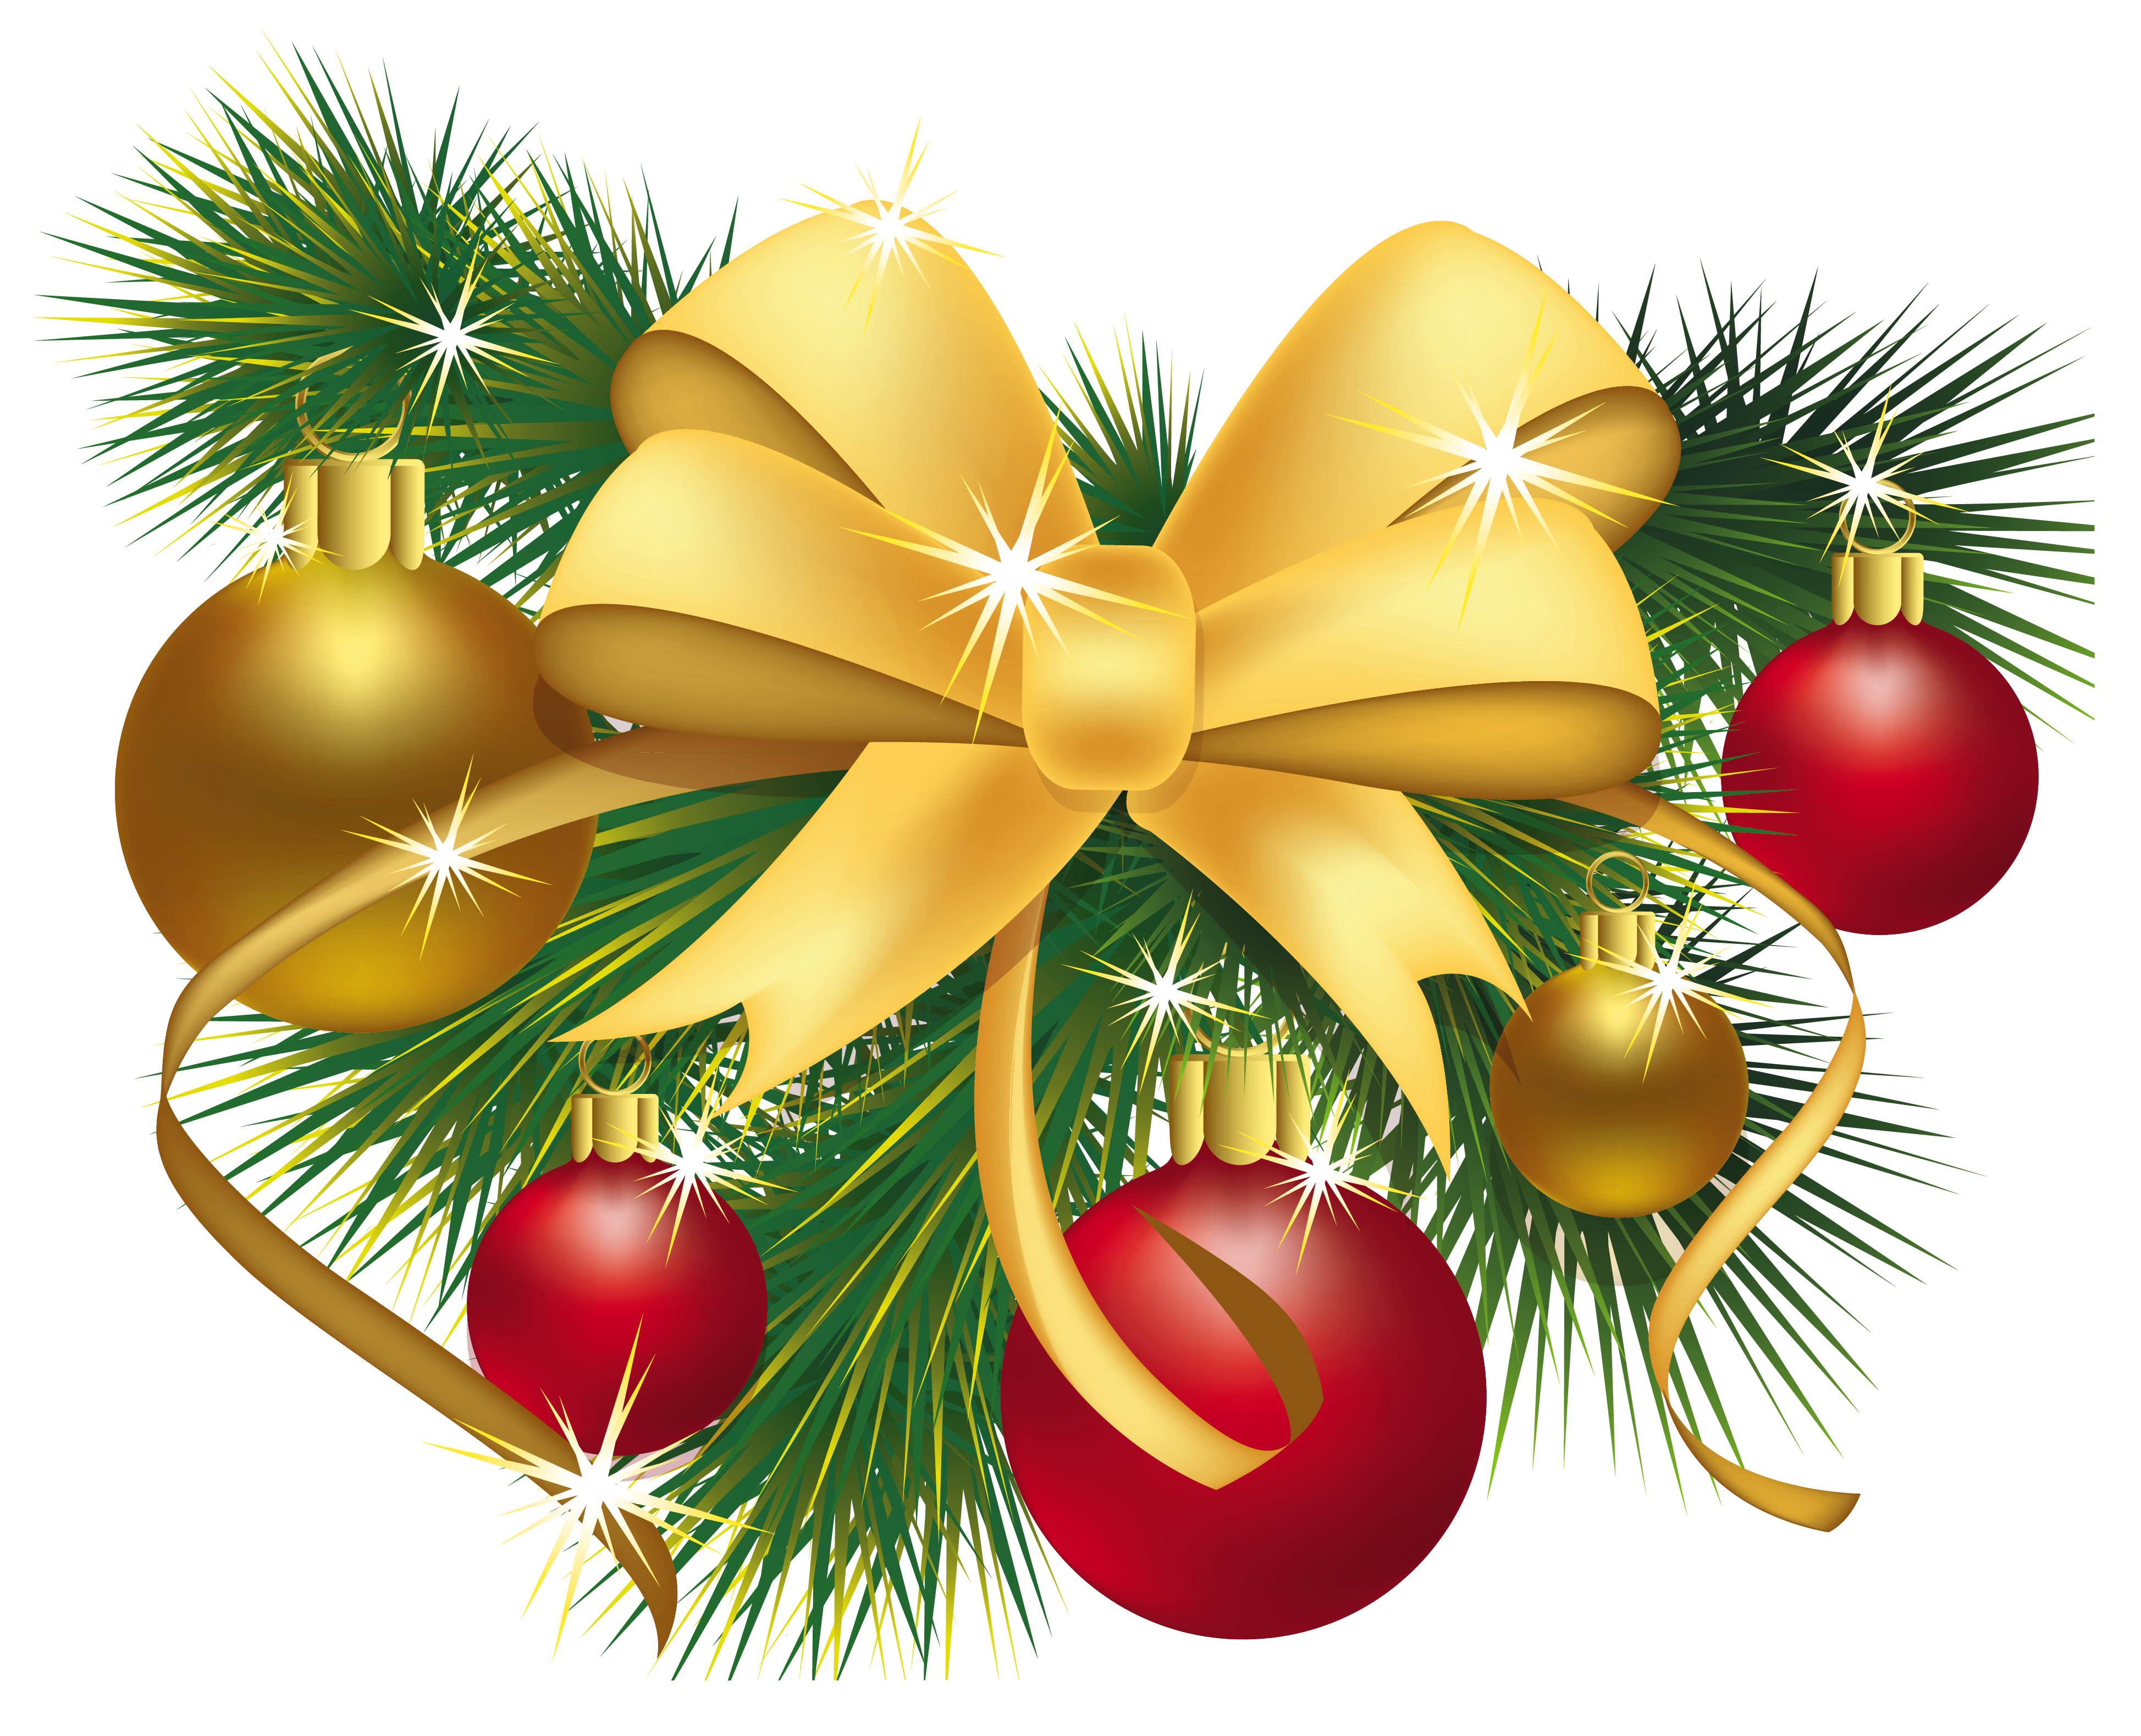 Transparent decoration picture gallery. Christmas png images